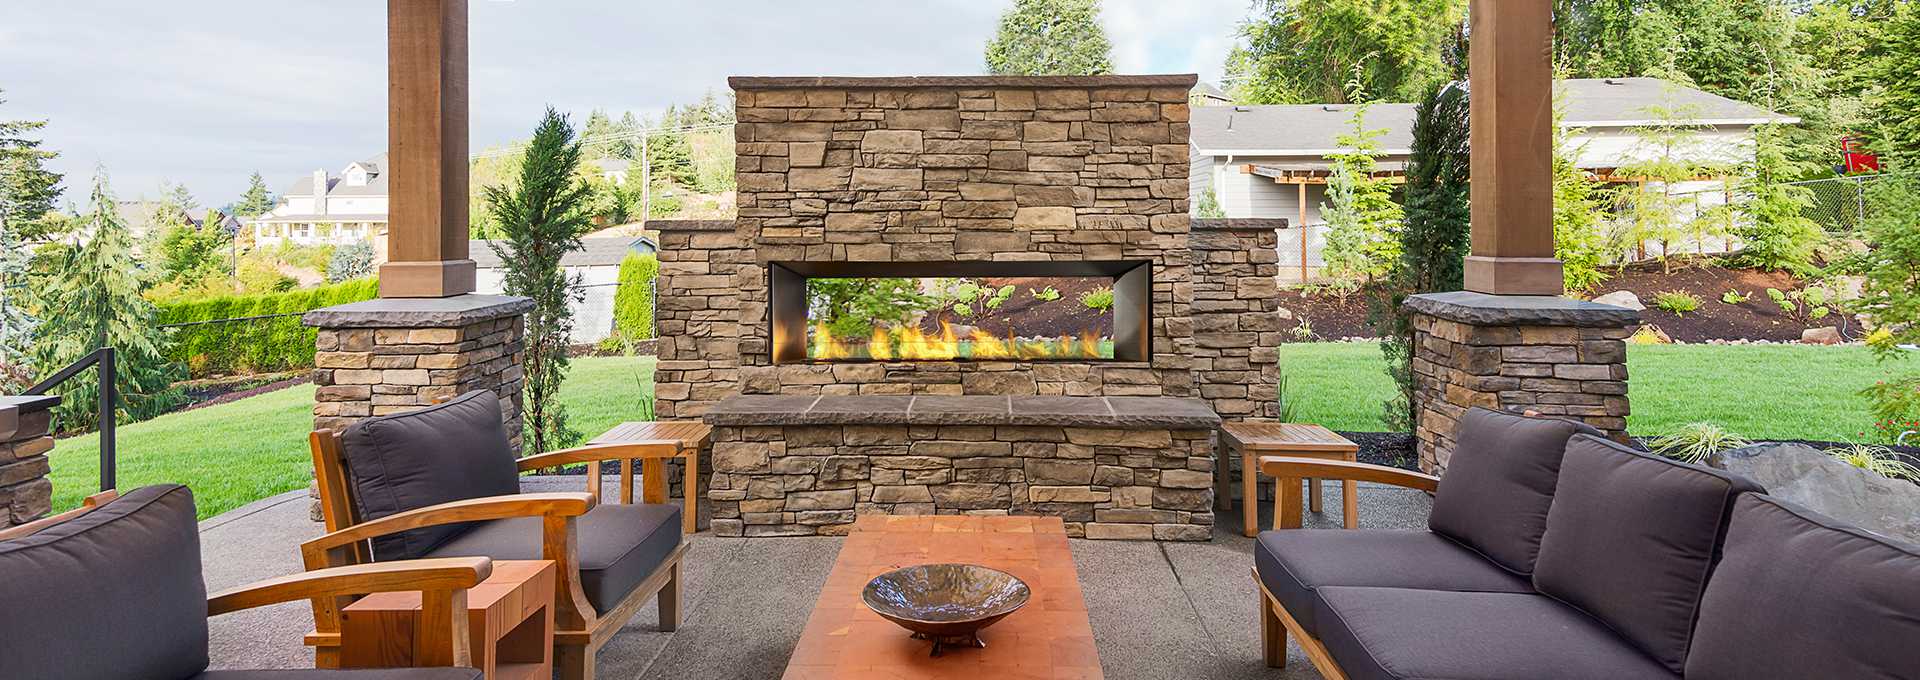 Outdoor Wall Mounted Fireplace